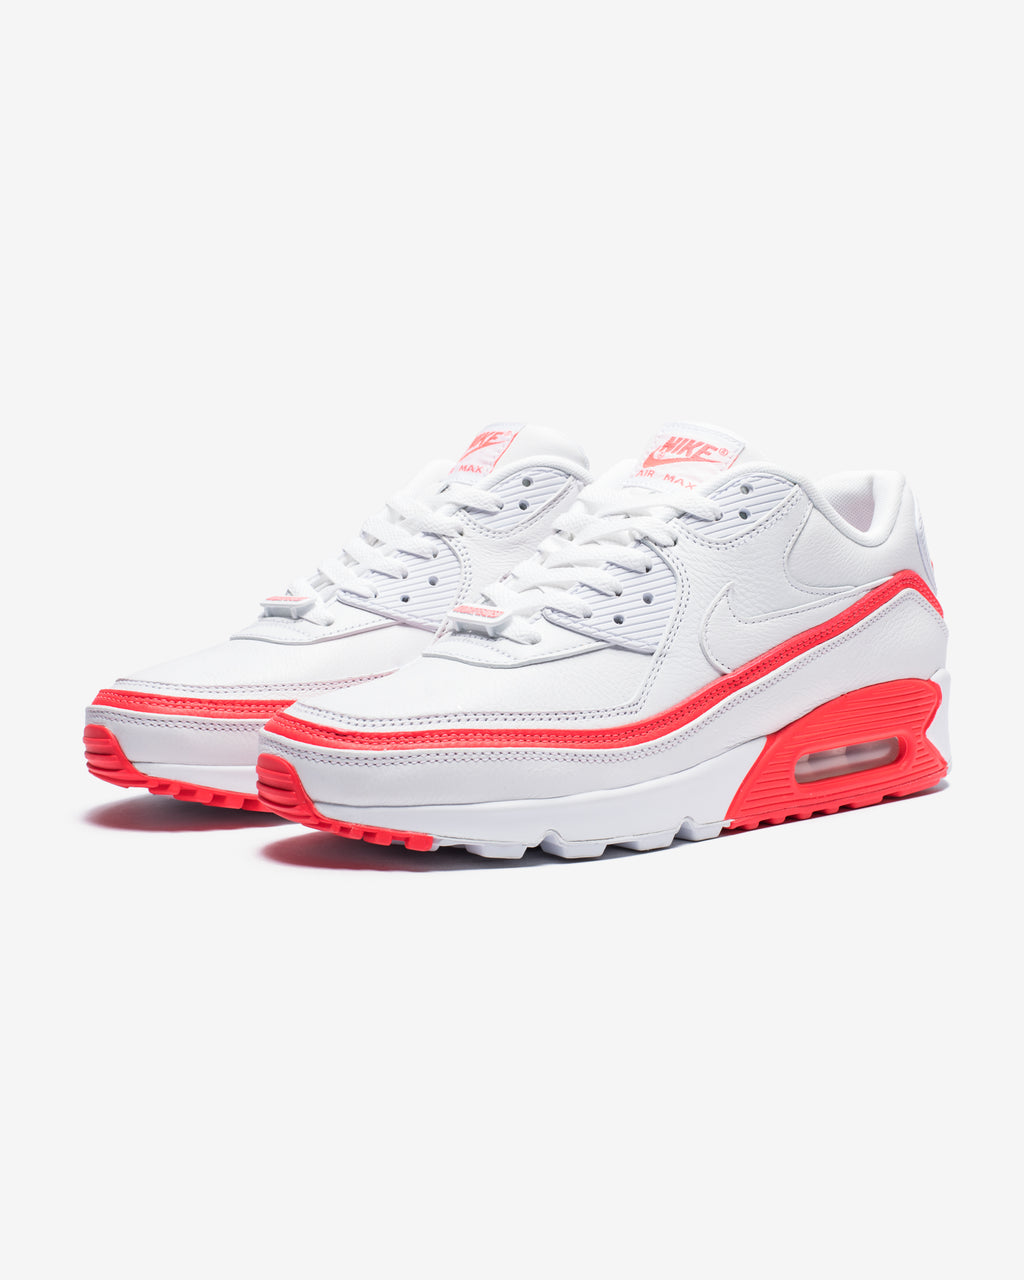 NIKE X UNDEFEATED AIR MAX 90 - WHITE/SOLARRED